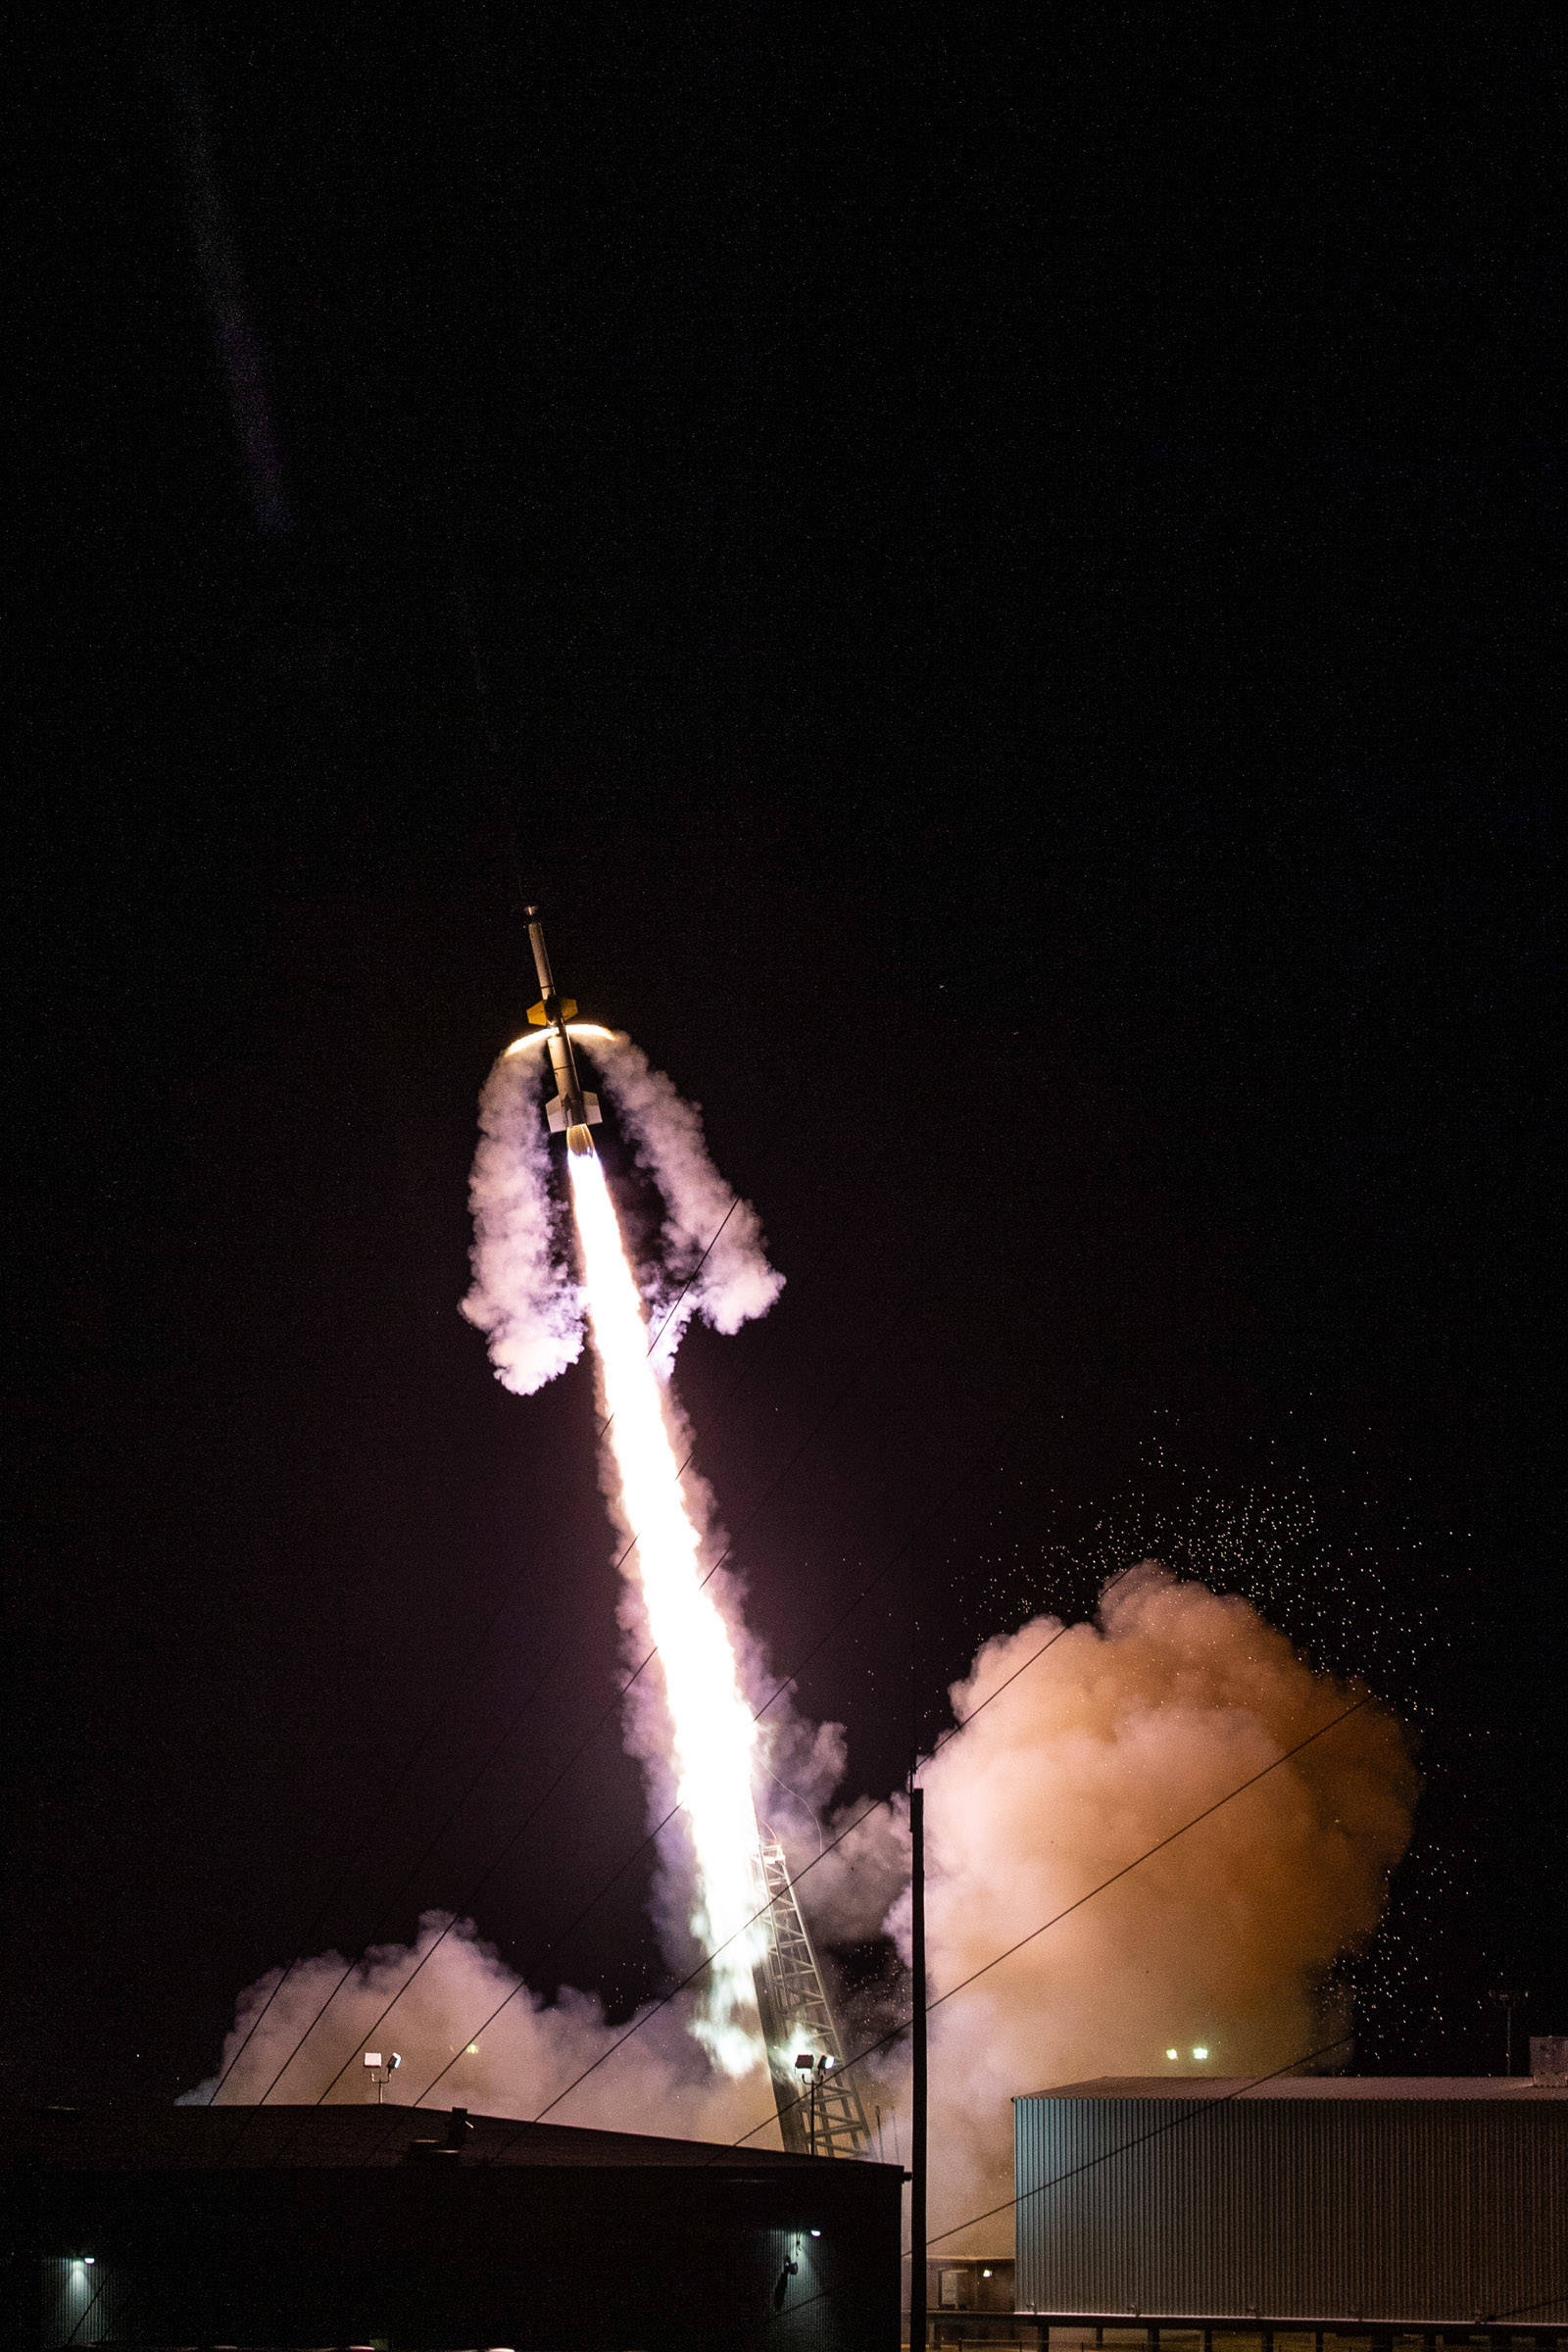 Terry Zaperach / NASA 
The NASA Black Brant XII rocket lifts off with the KiNET-X experiment at Wallops Flight Facility in Virginia on May 16, 2021.